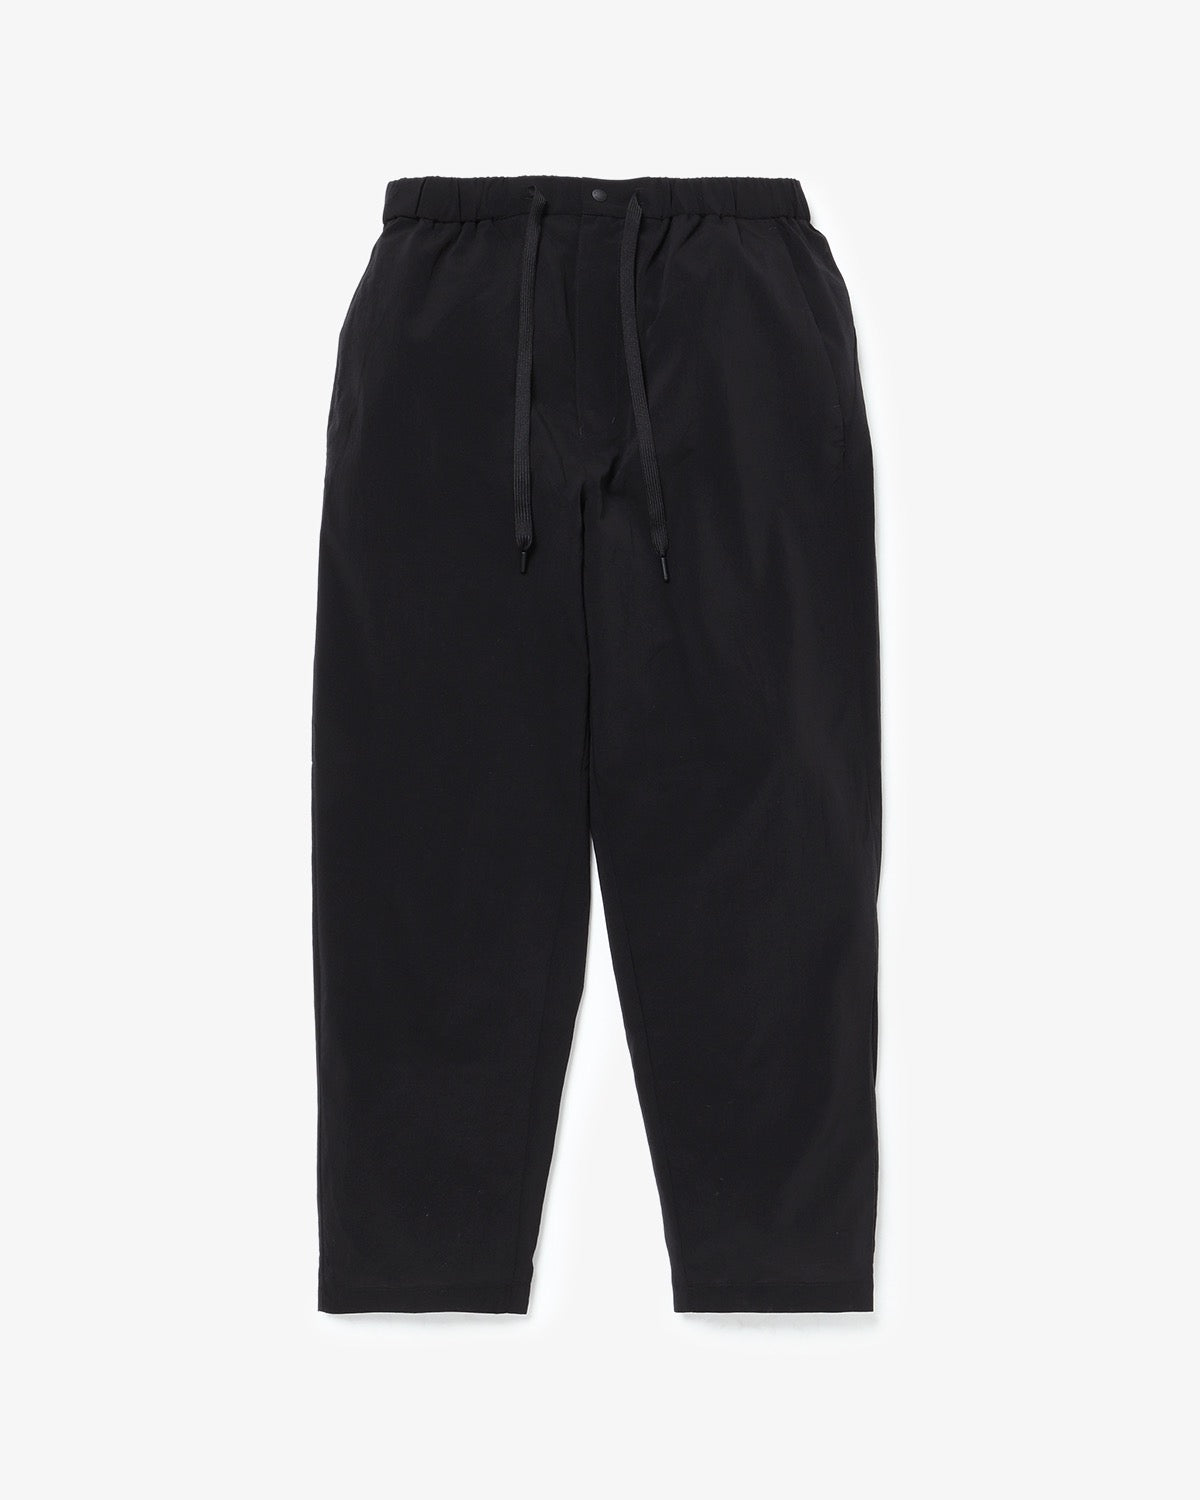 BREATHABLE QUICK DRY PANTS